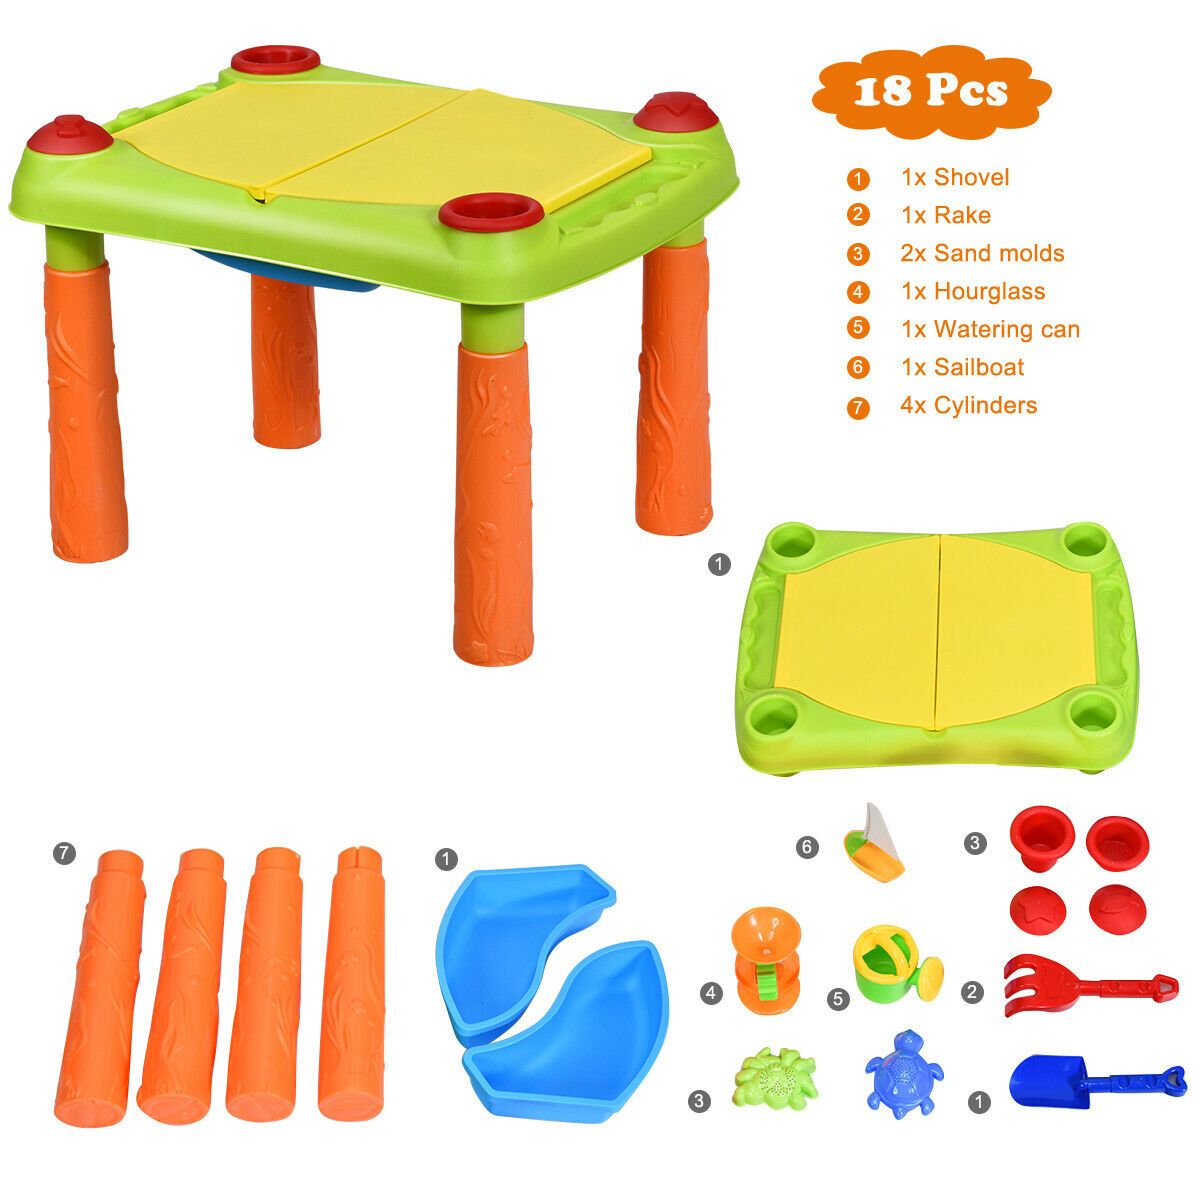 Childrens Beach Activity Table Play Set with 2 Basins